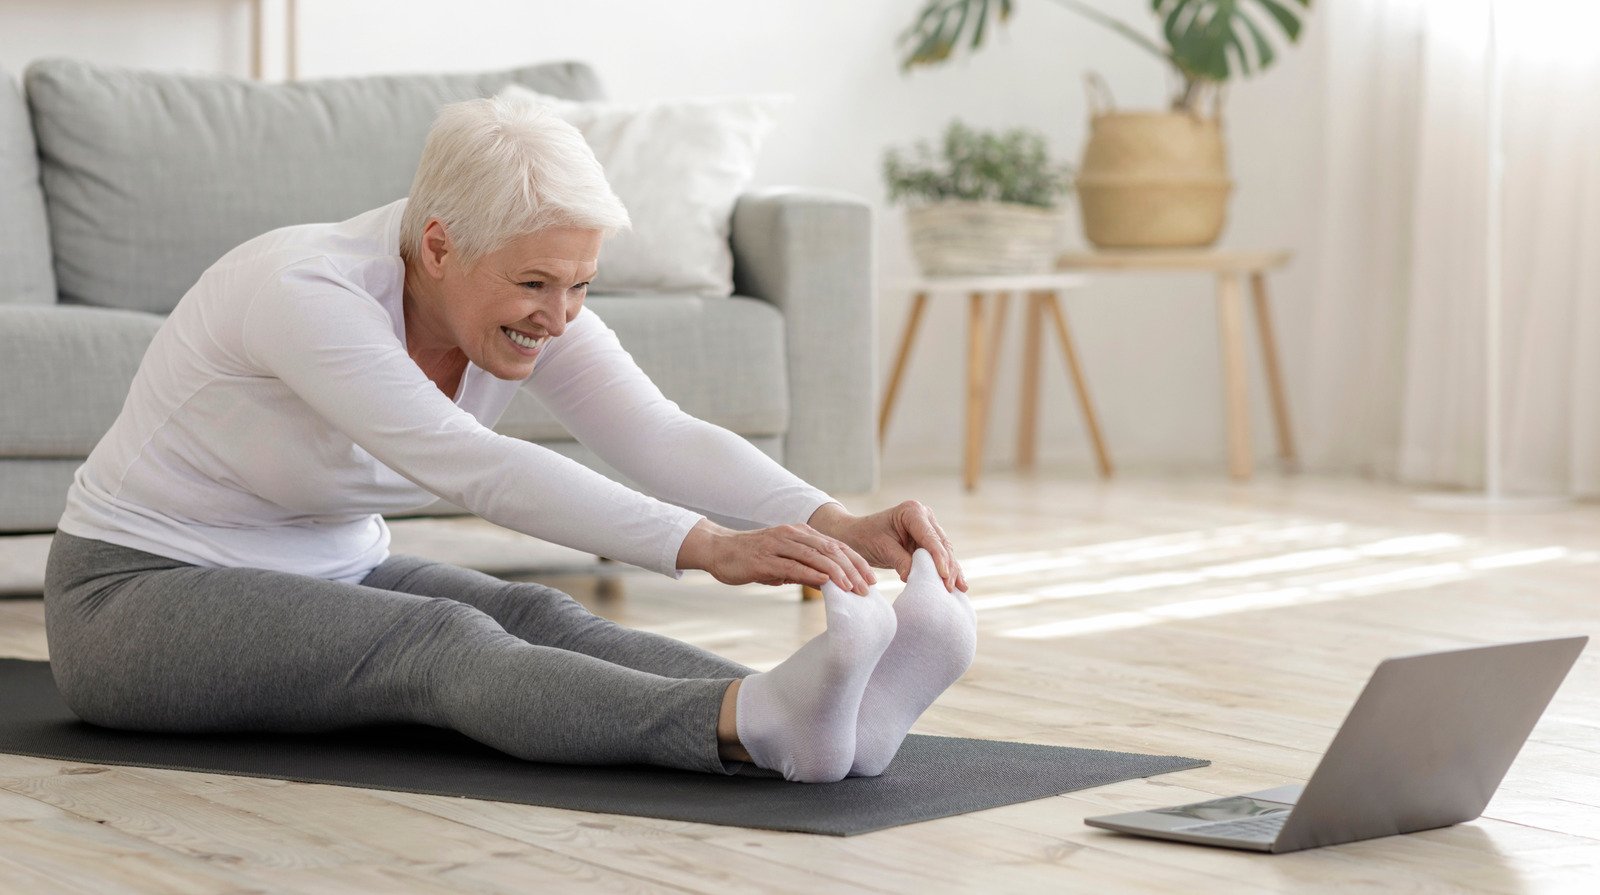 Study Shows What A Yoga Practice Can Do To Relieve Osteoarthritis Symptoms - Health Digest